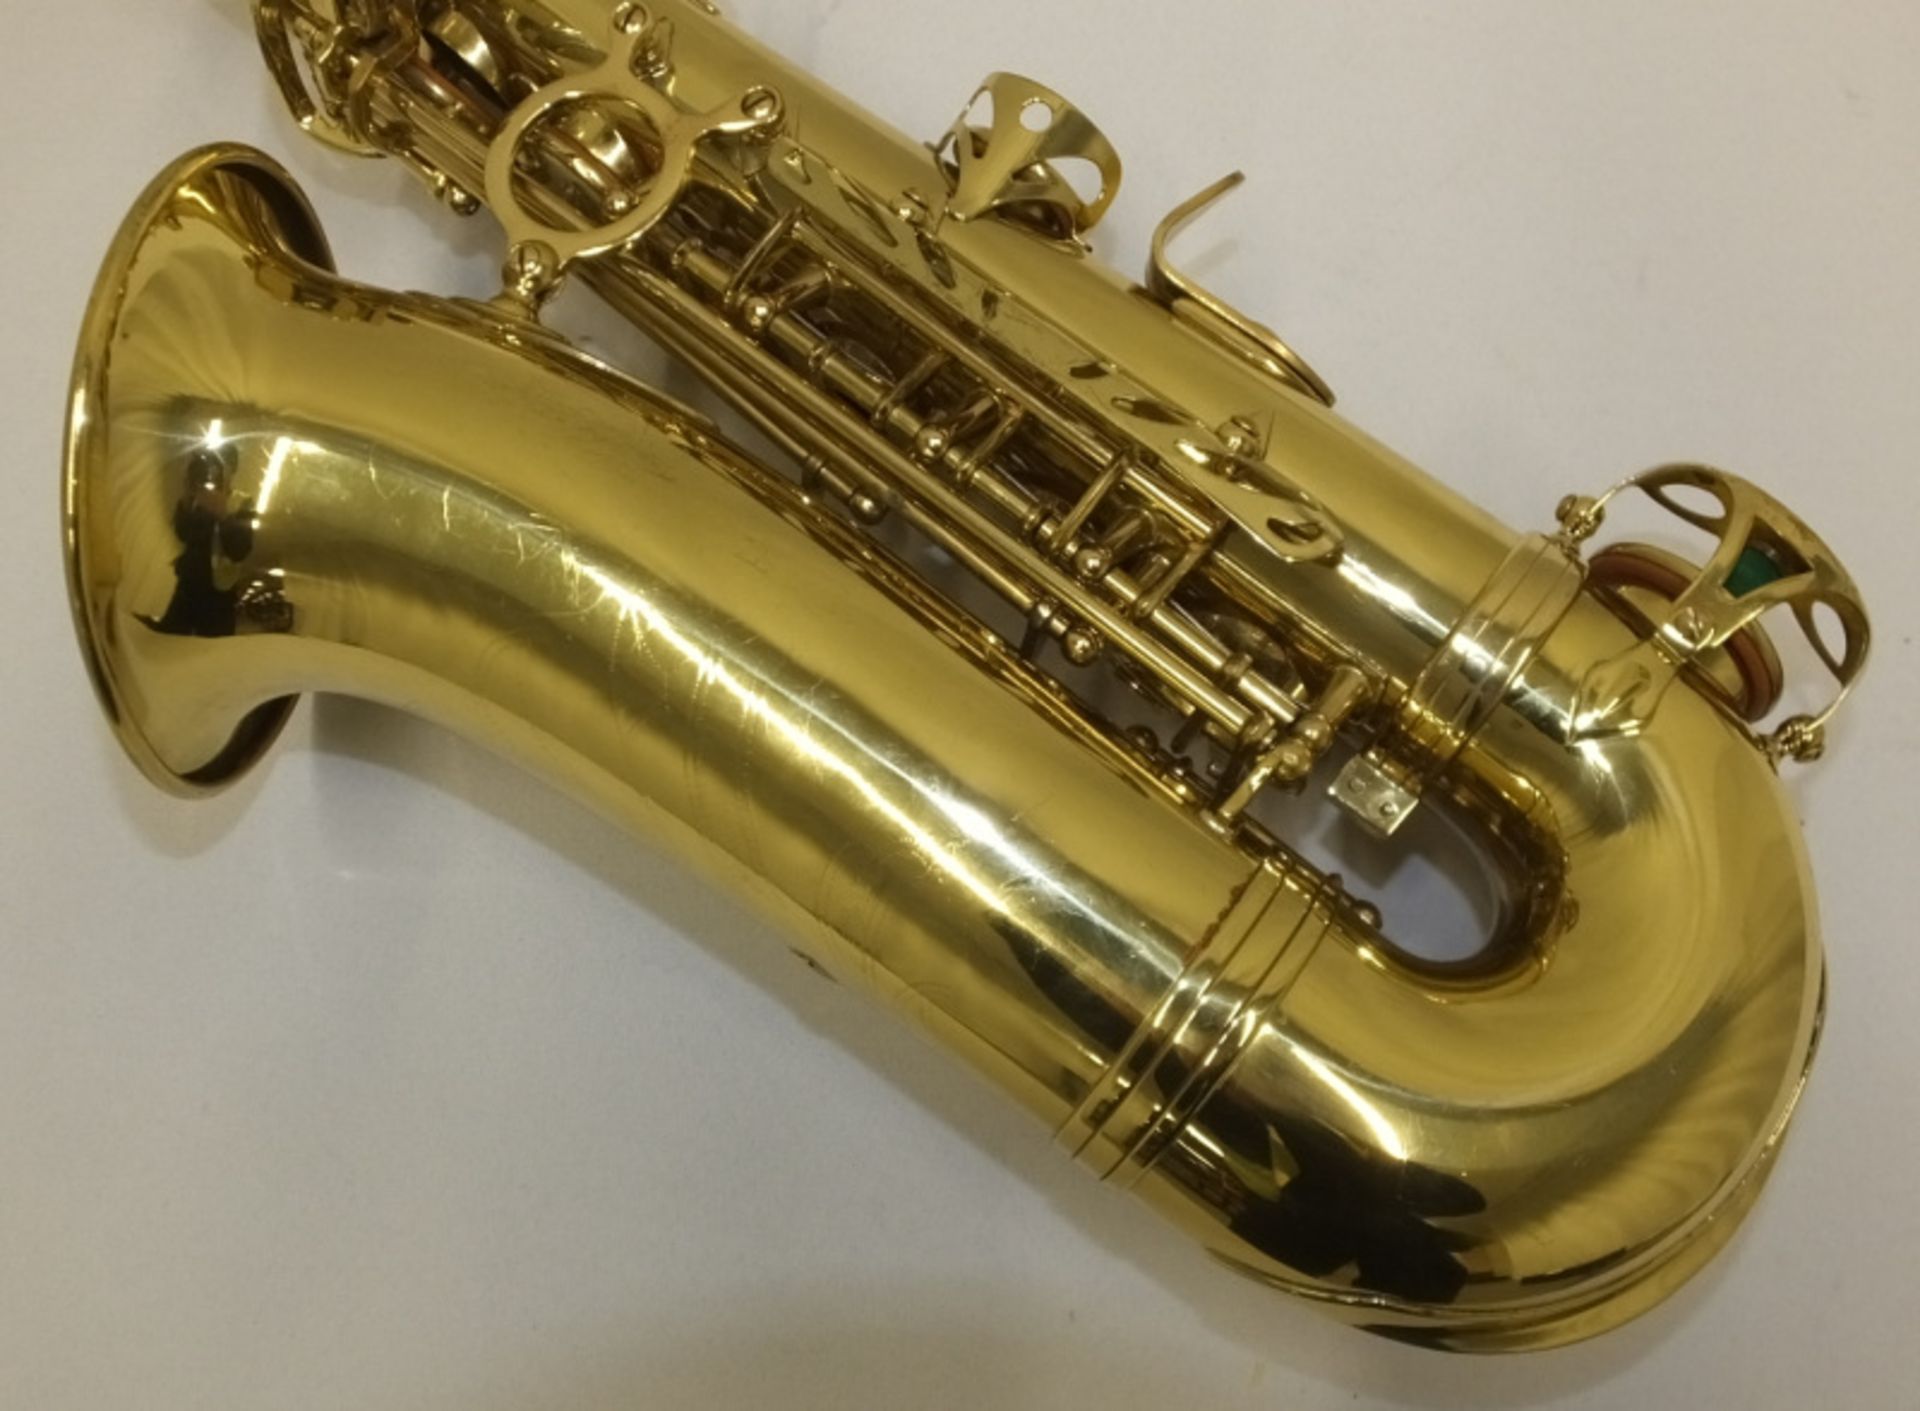 Simba Instruments Saxophone in Simba case - serial number 20960603 - Please check photos carefully - Image 10 of 16